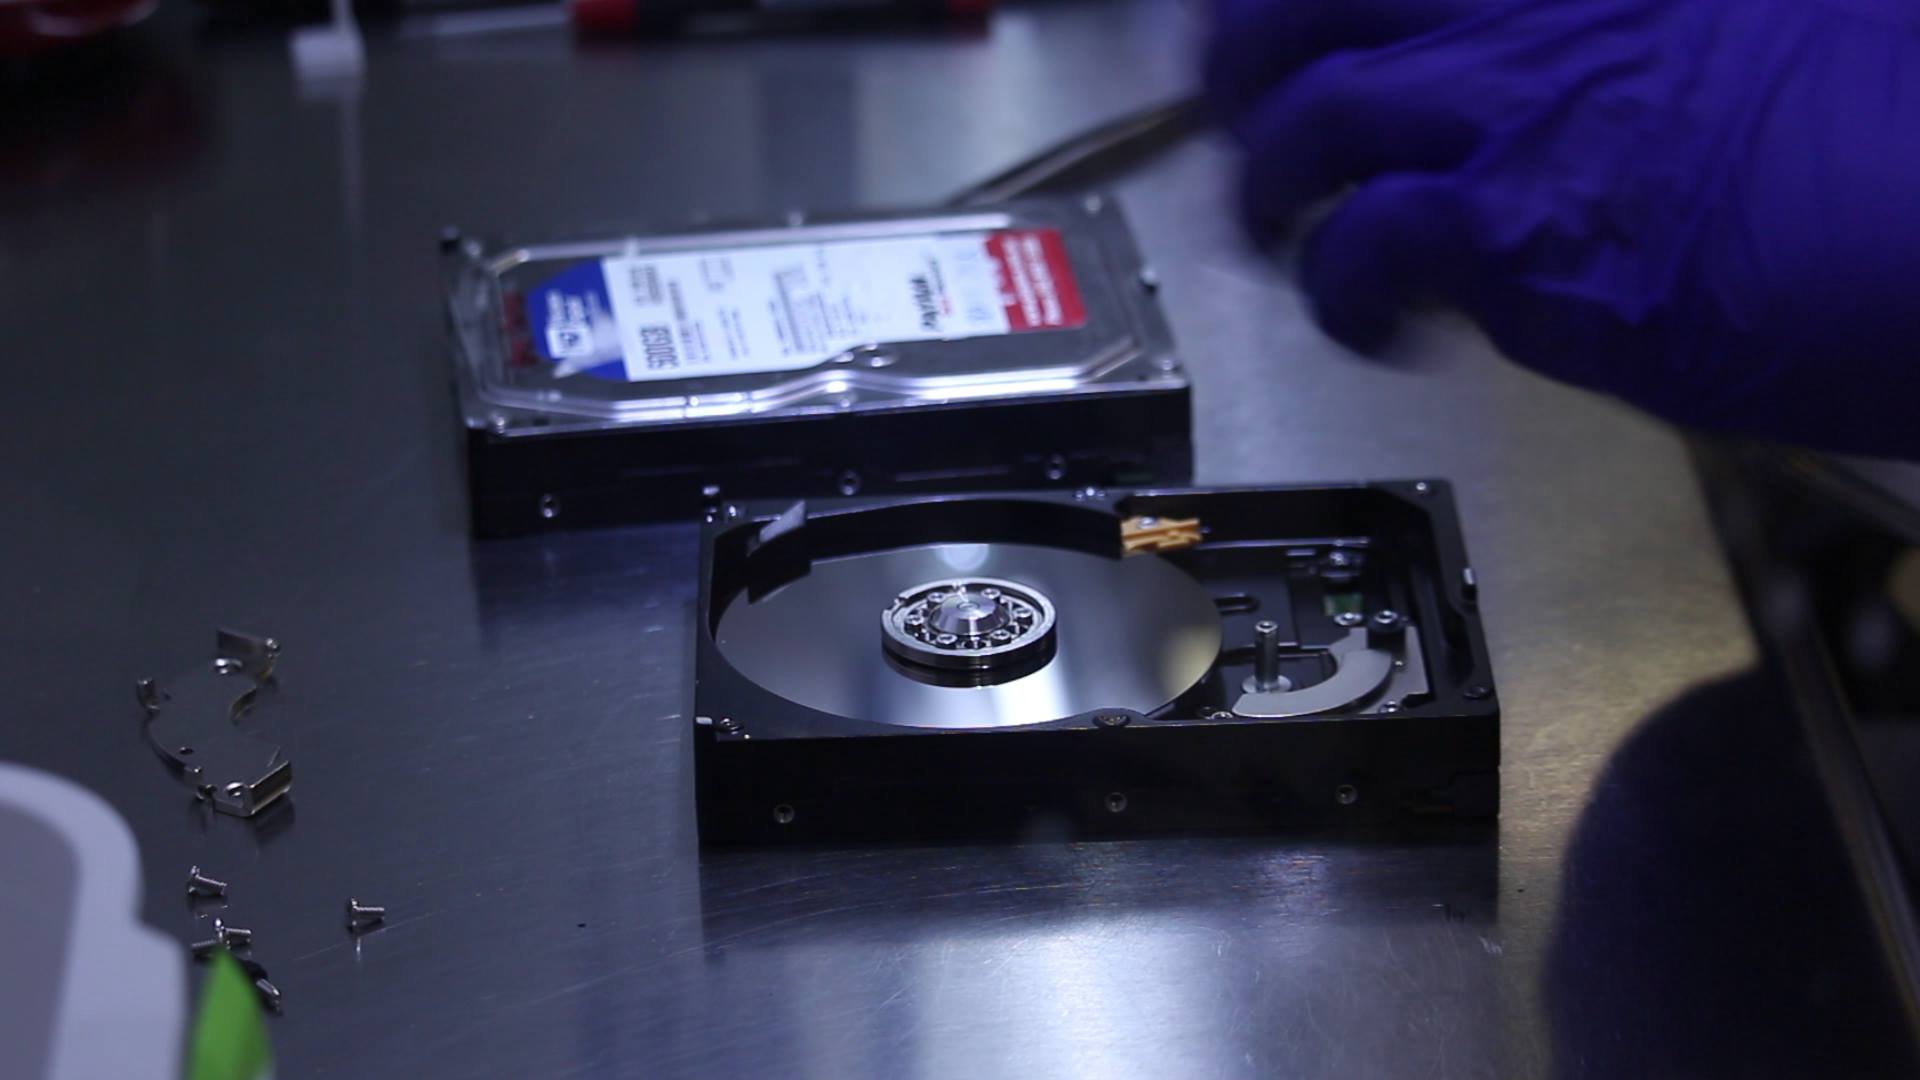 How To Data Recovery Services From A Faulty Hard Drive?